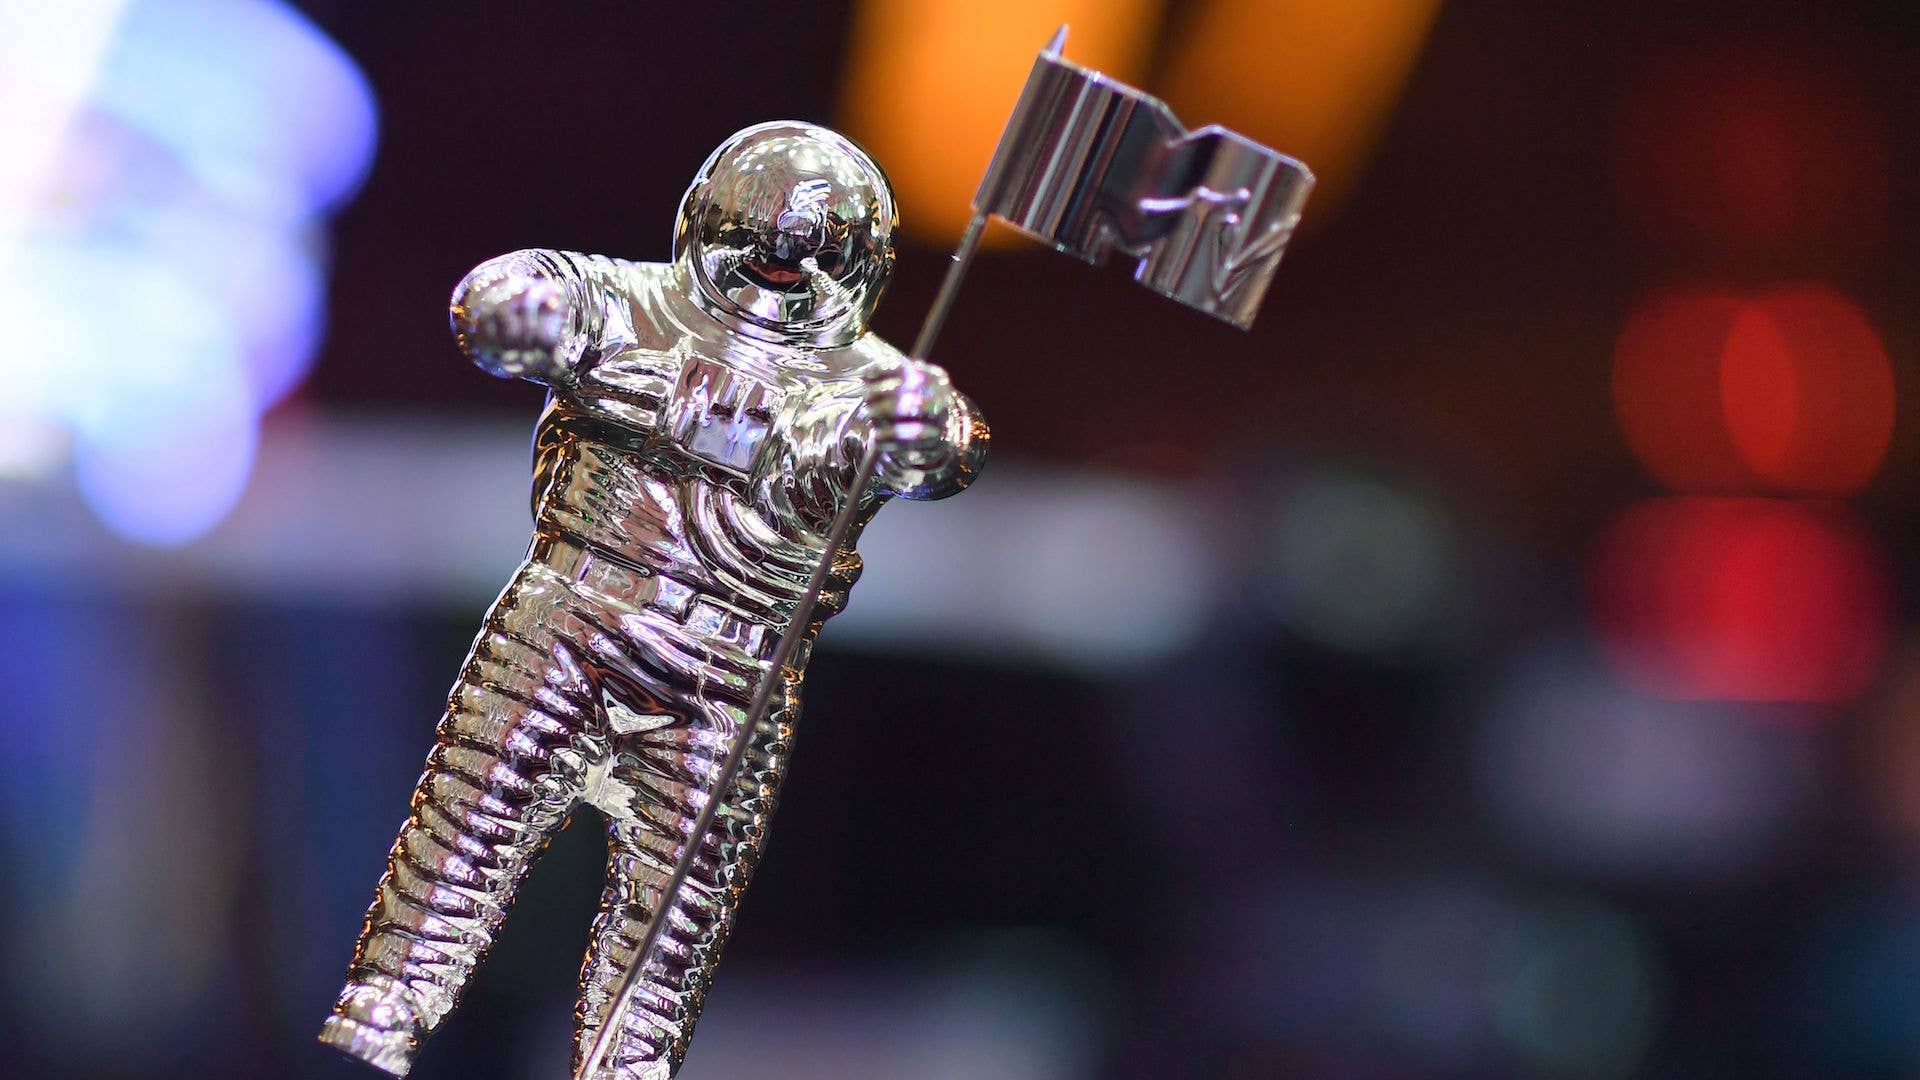 VMA trophy known as "Moon Person" is seen during the 2018 VMAs.